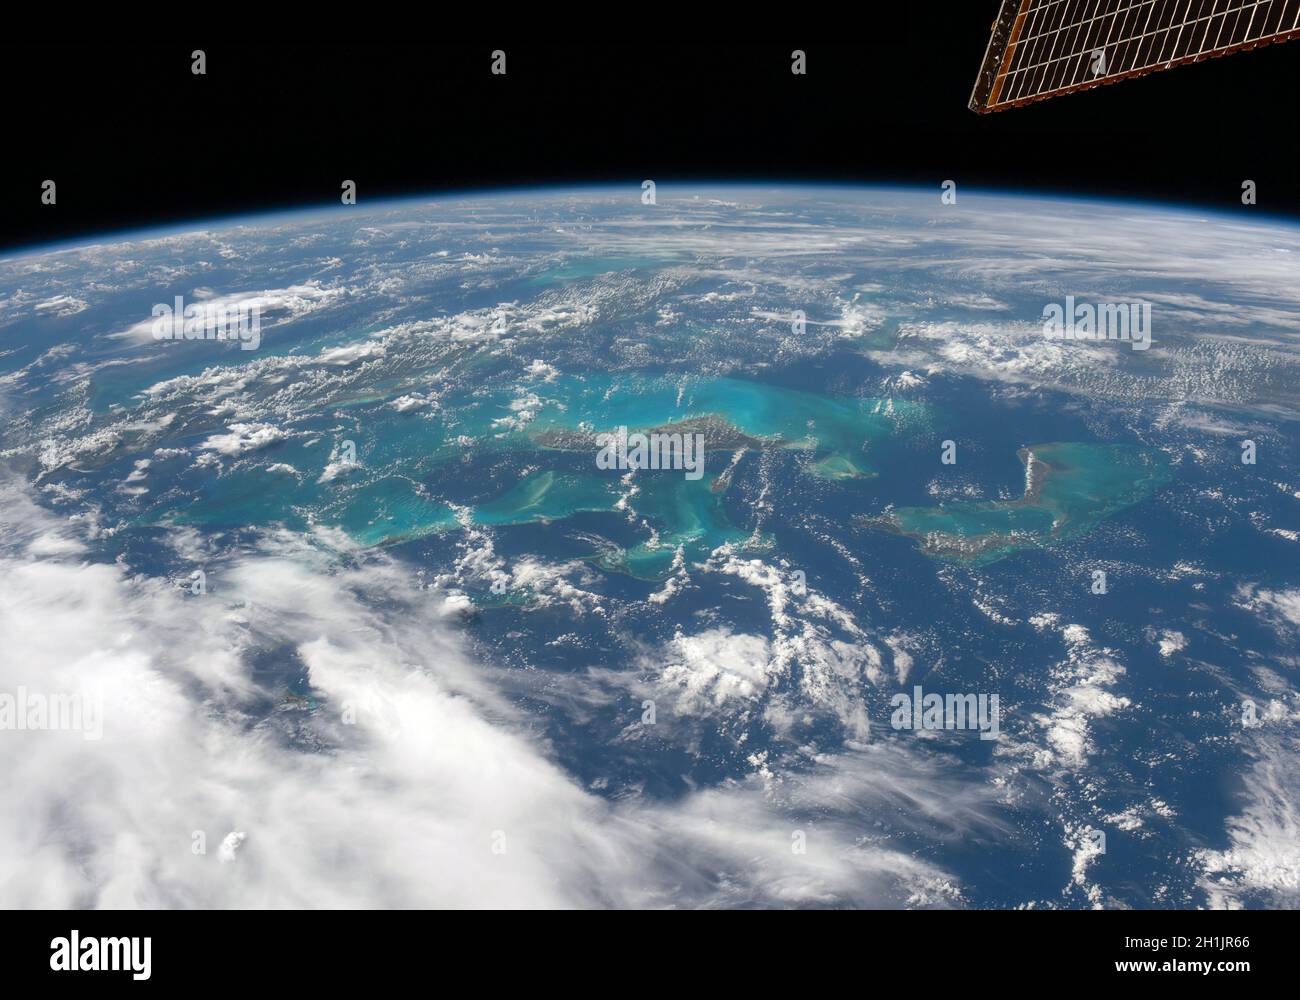 A view of Earth from the International Space Station: The Caribbean  An optimised and digitally enhanced version of a NASA image. Credit NASA / A. Hoshide Stock Photo